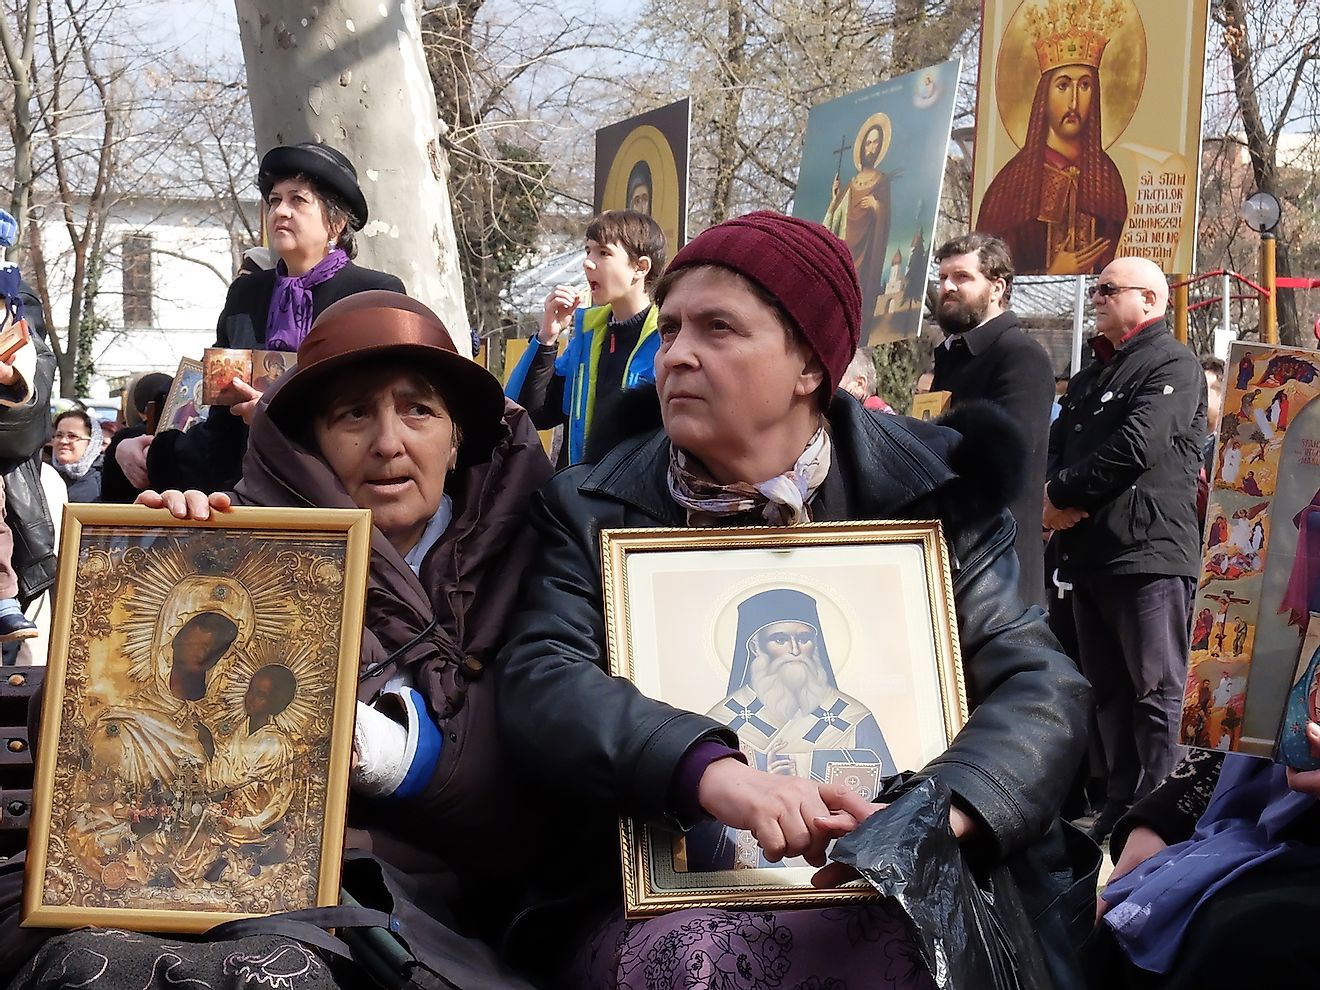 Orthodox believers are praying during cultural manifestation "The Icon - Window to God" which marks the celebration of the Orthodoxy Sunday. Image credit: Gabriel Petrescu/Shutterstock.com